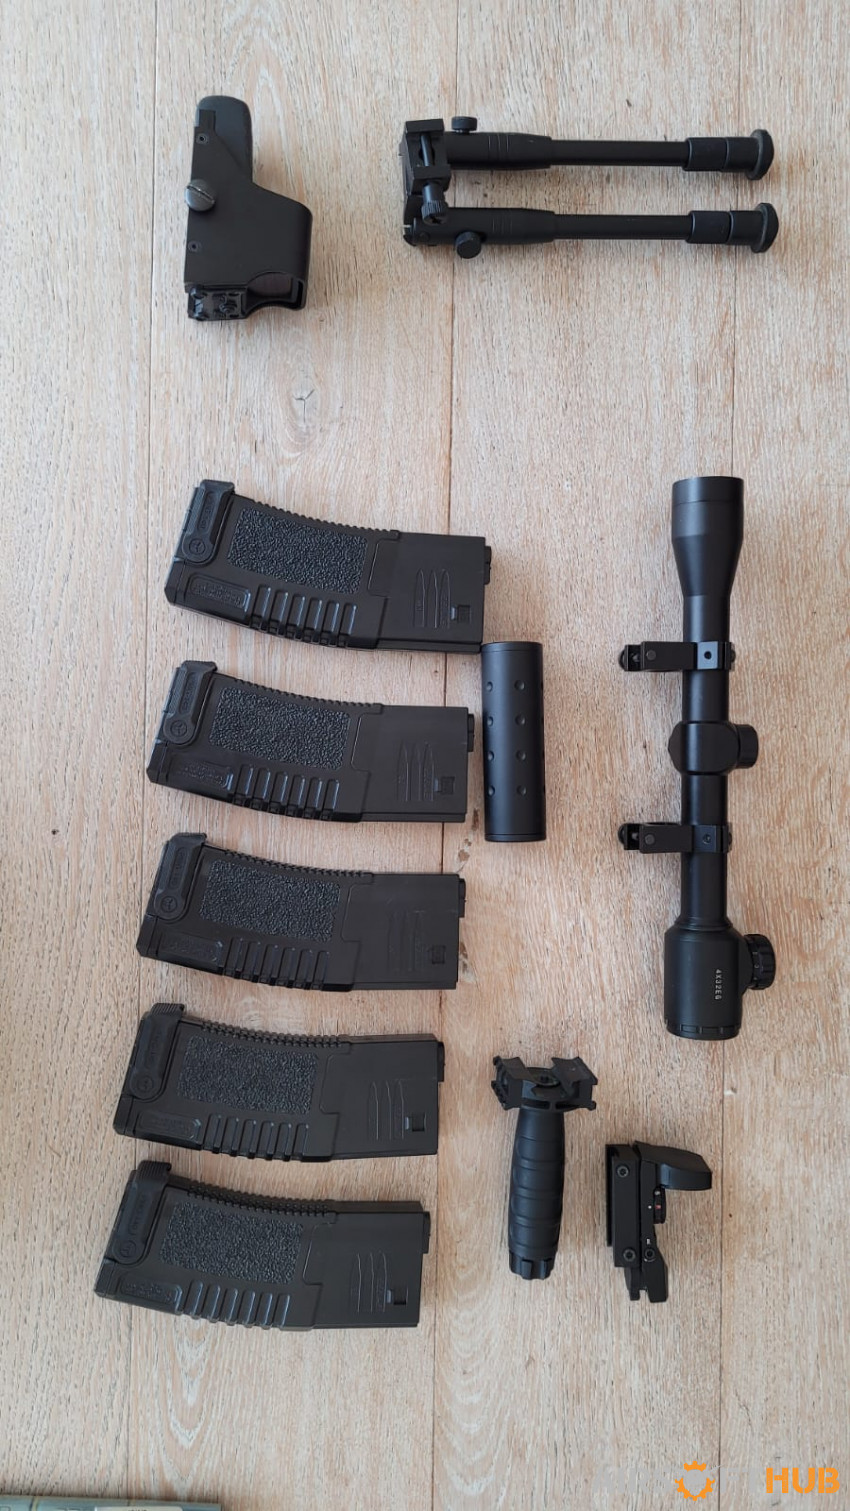 Bundle of gear,  G&G CM16 - Used airsoft equipment